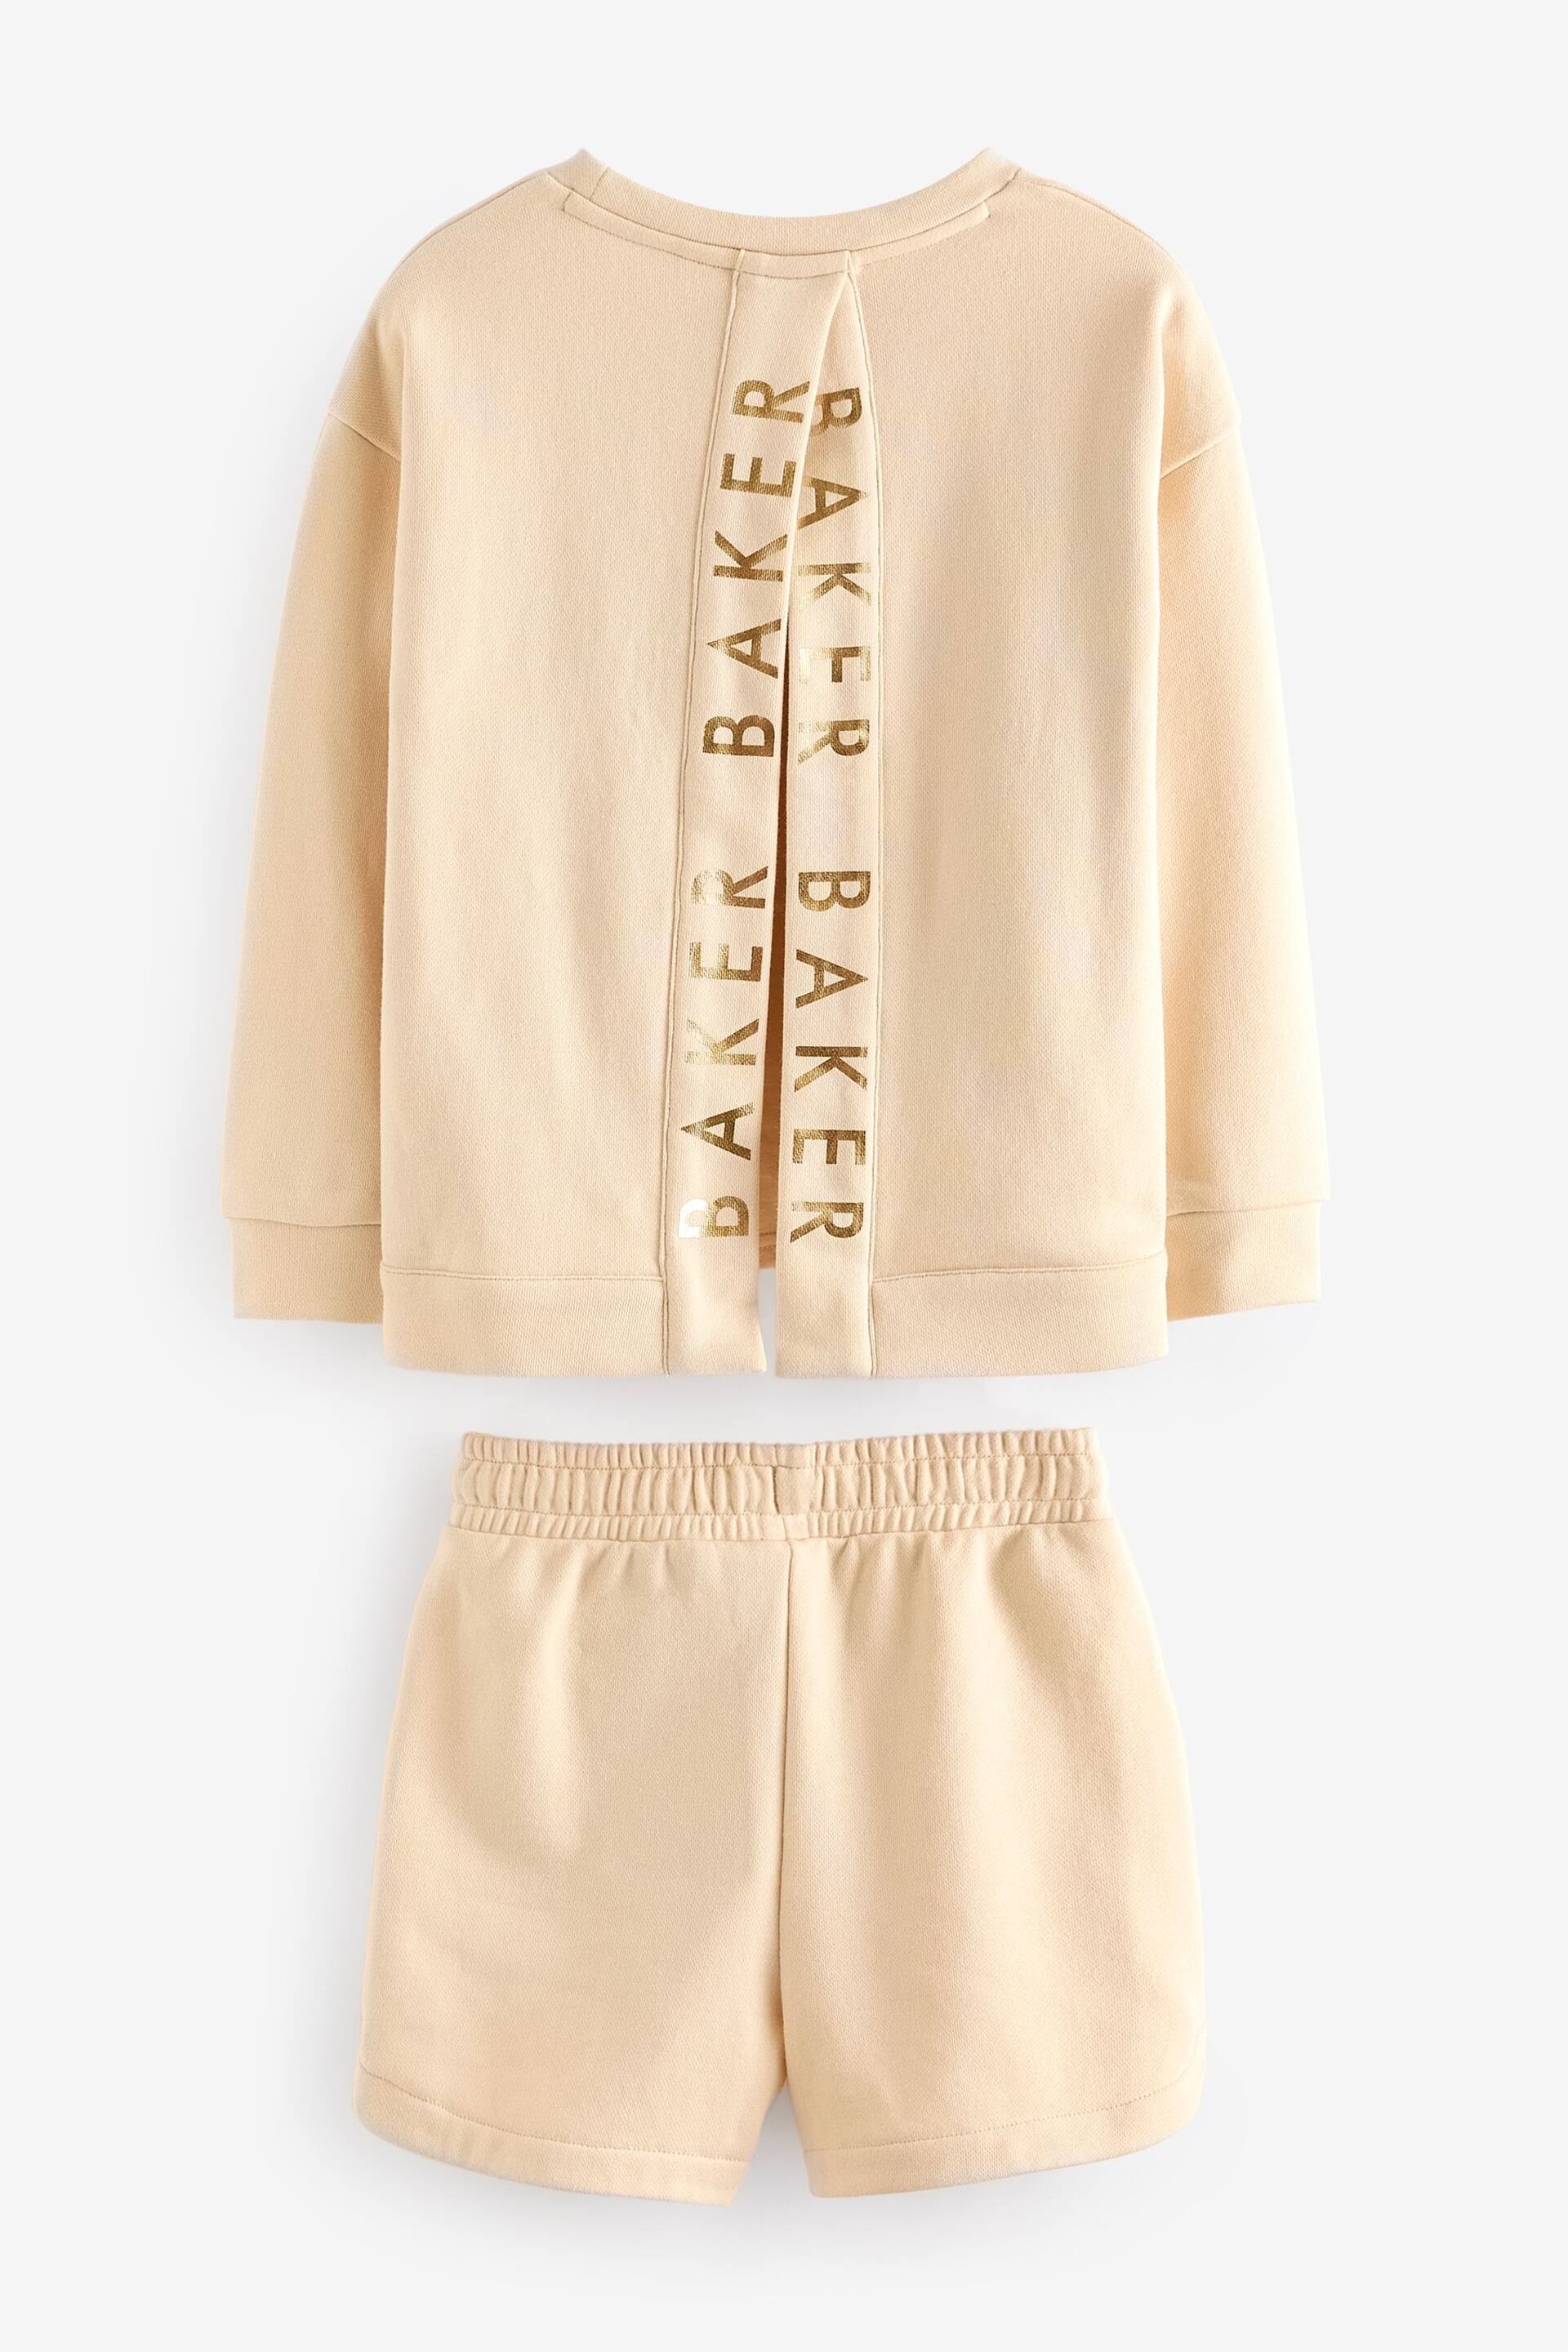 Baker by Ted Baker Stone Split Back Sweater And Shorts Set - Image 9 of 10